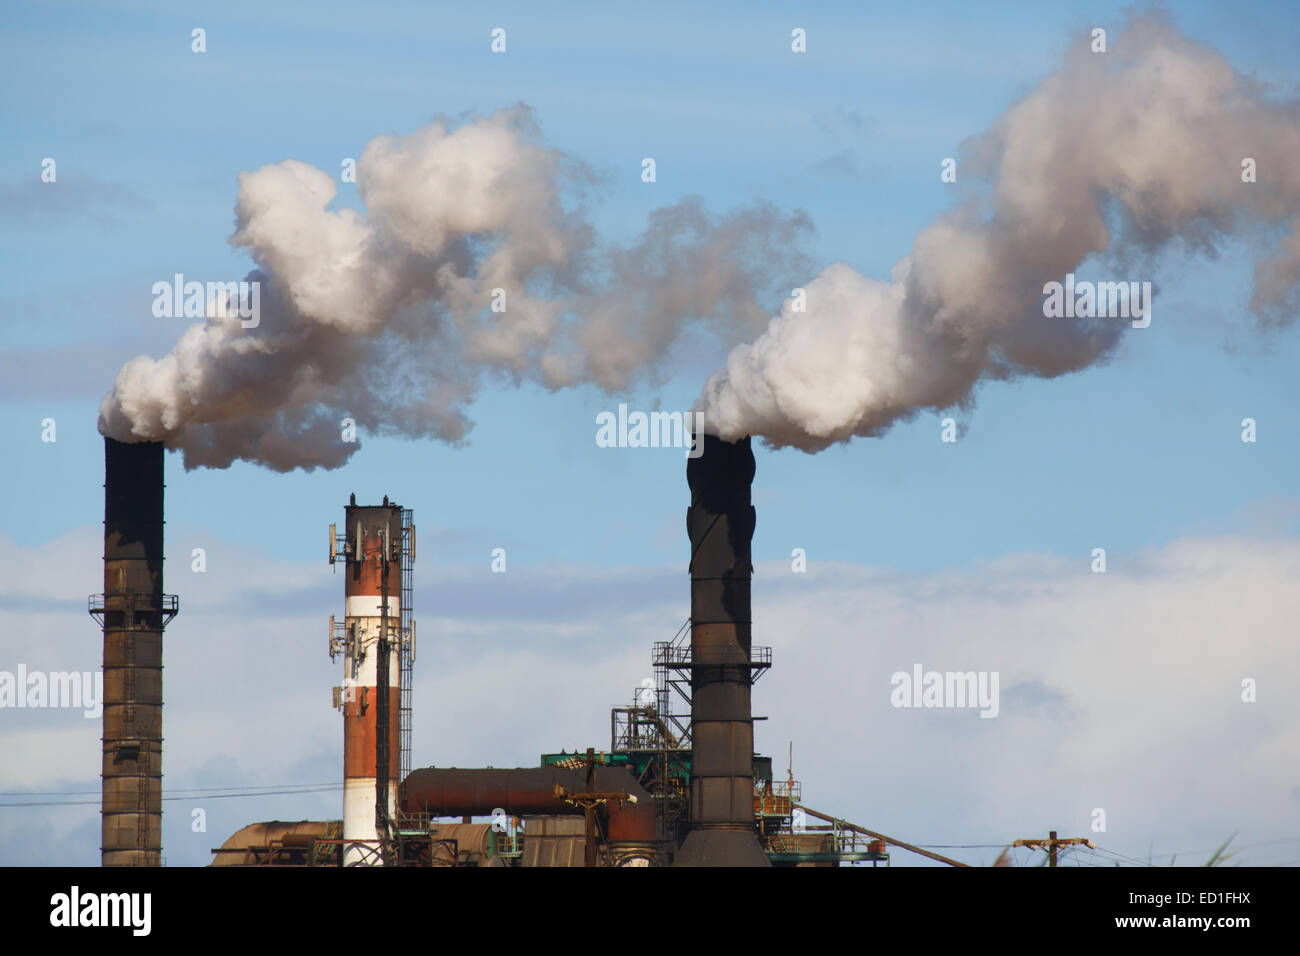 Emissions from Hawaiian Commercial and Sugar plant, Maui, Hawaii. Stock Photo